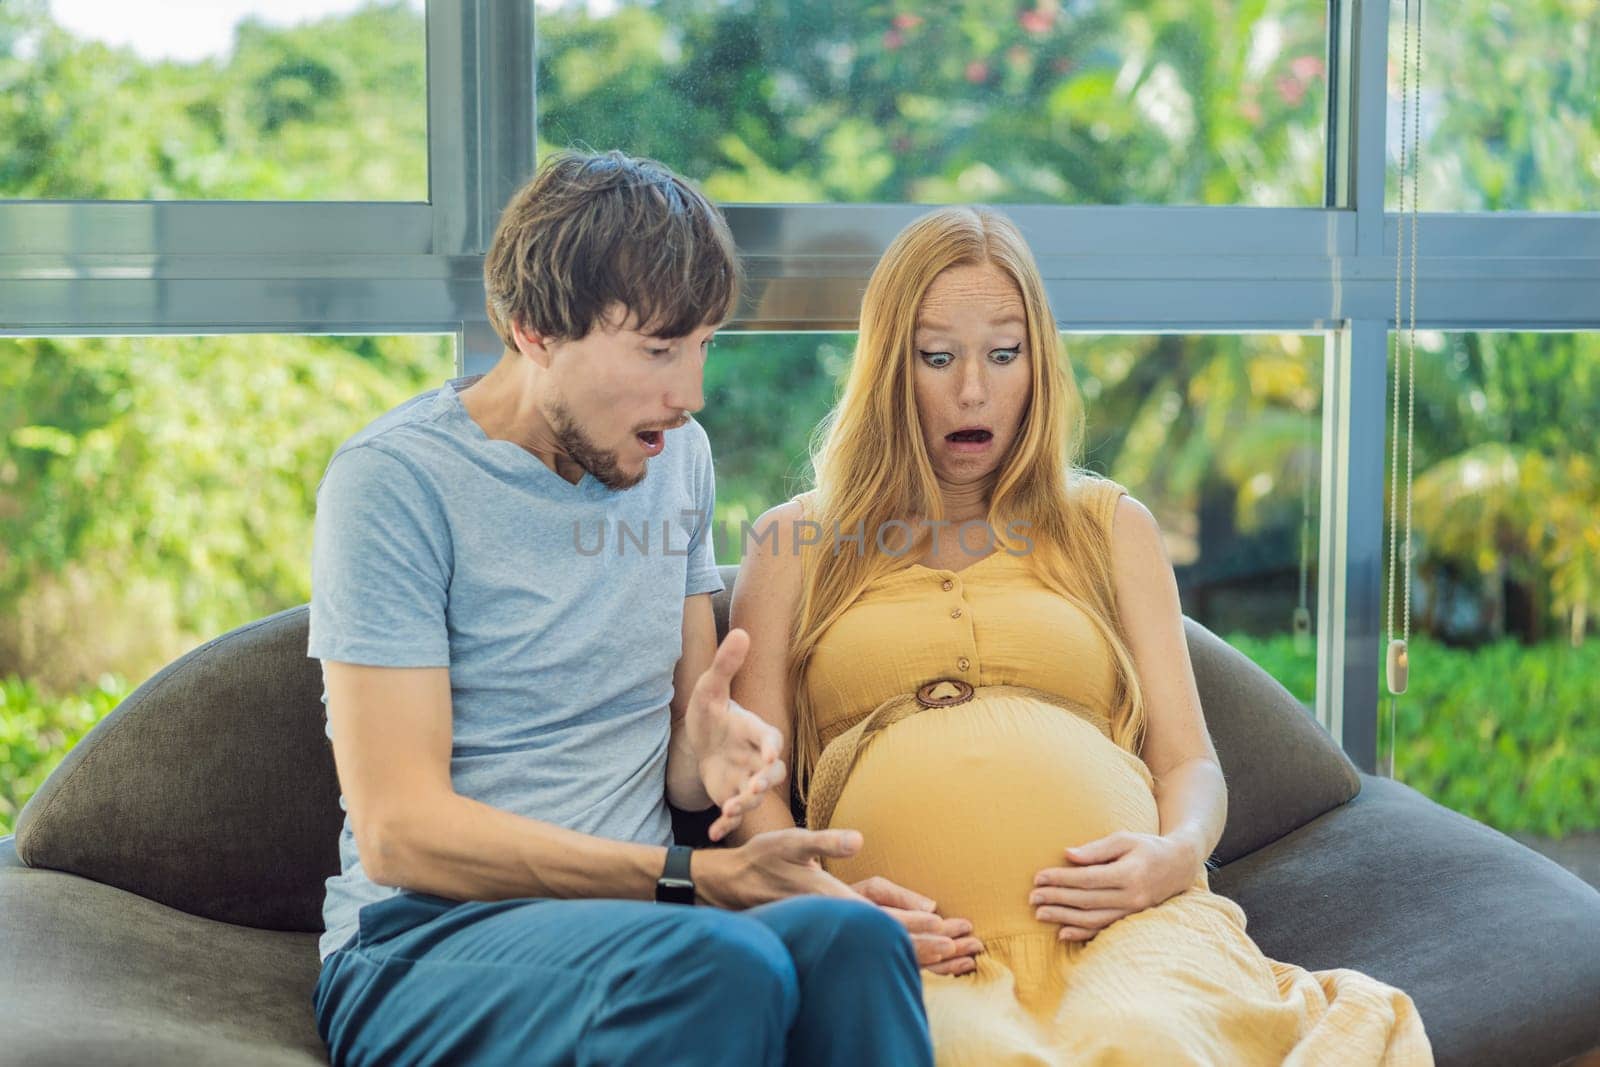 In a pivotal moment, the pregnant woman and father navigate the onset of contractions together, sharing the intensity and anticipation as they embark on the journey of welcoming their baby.